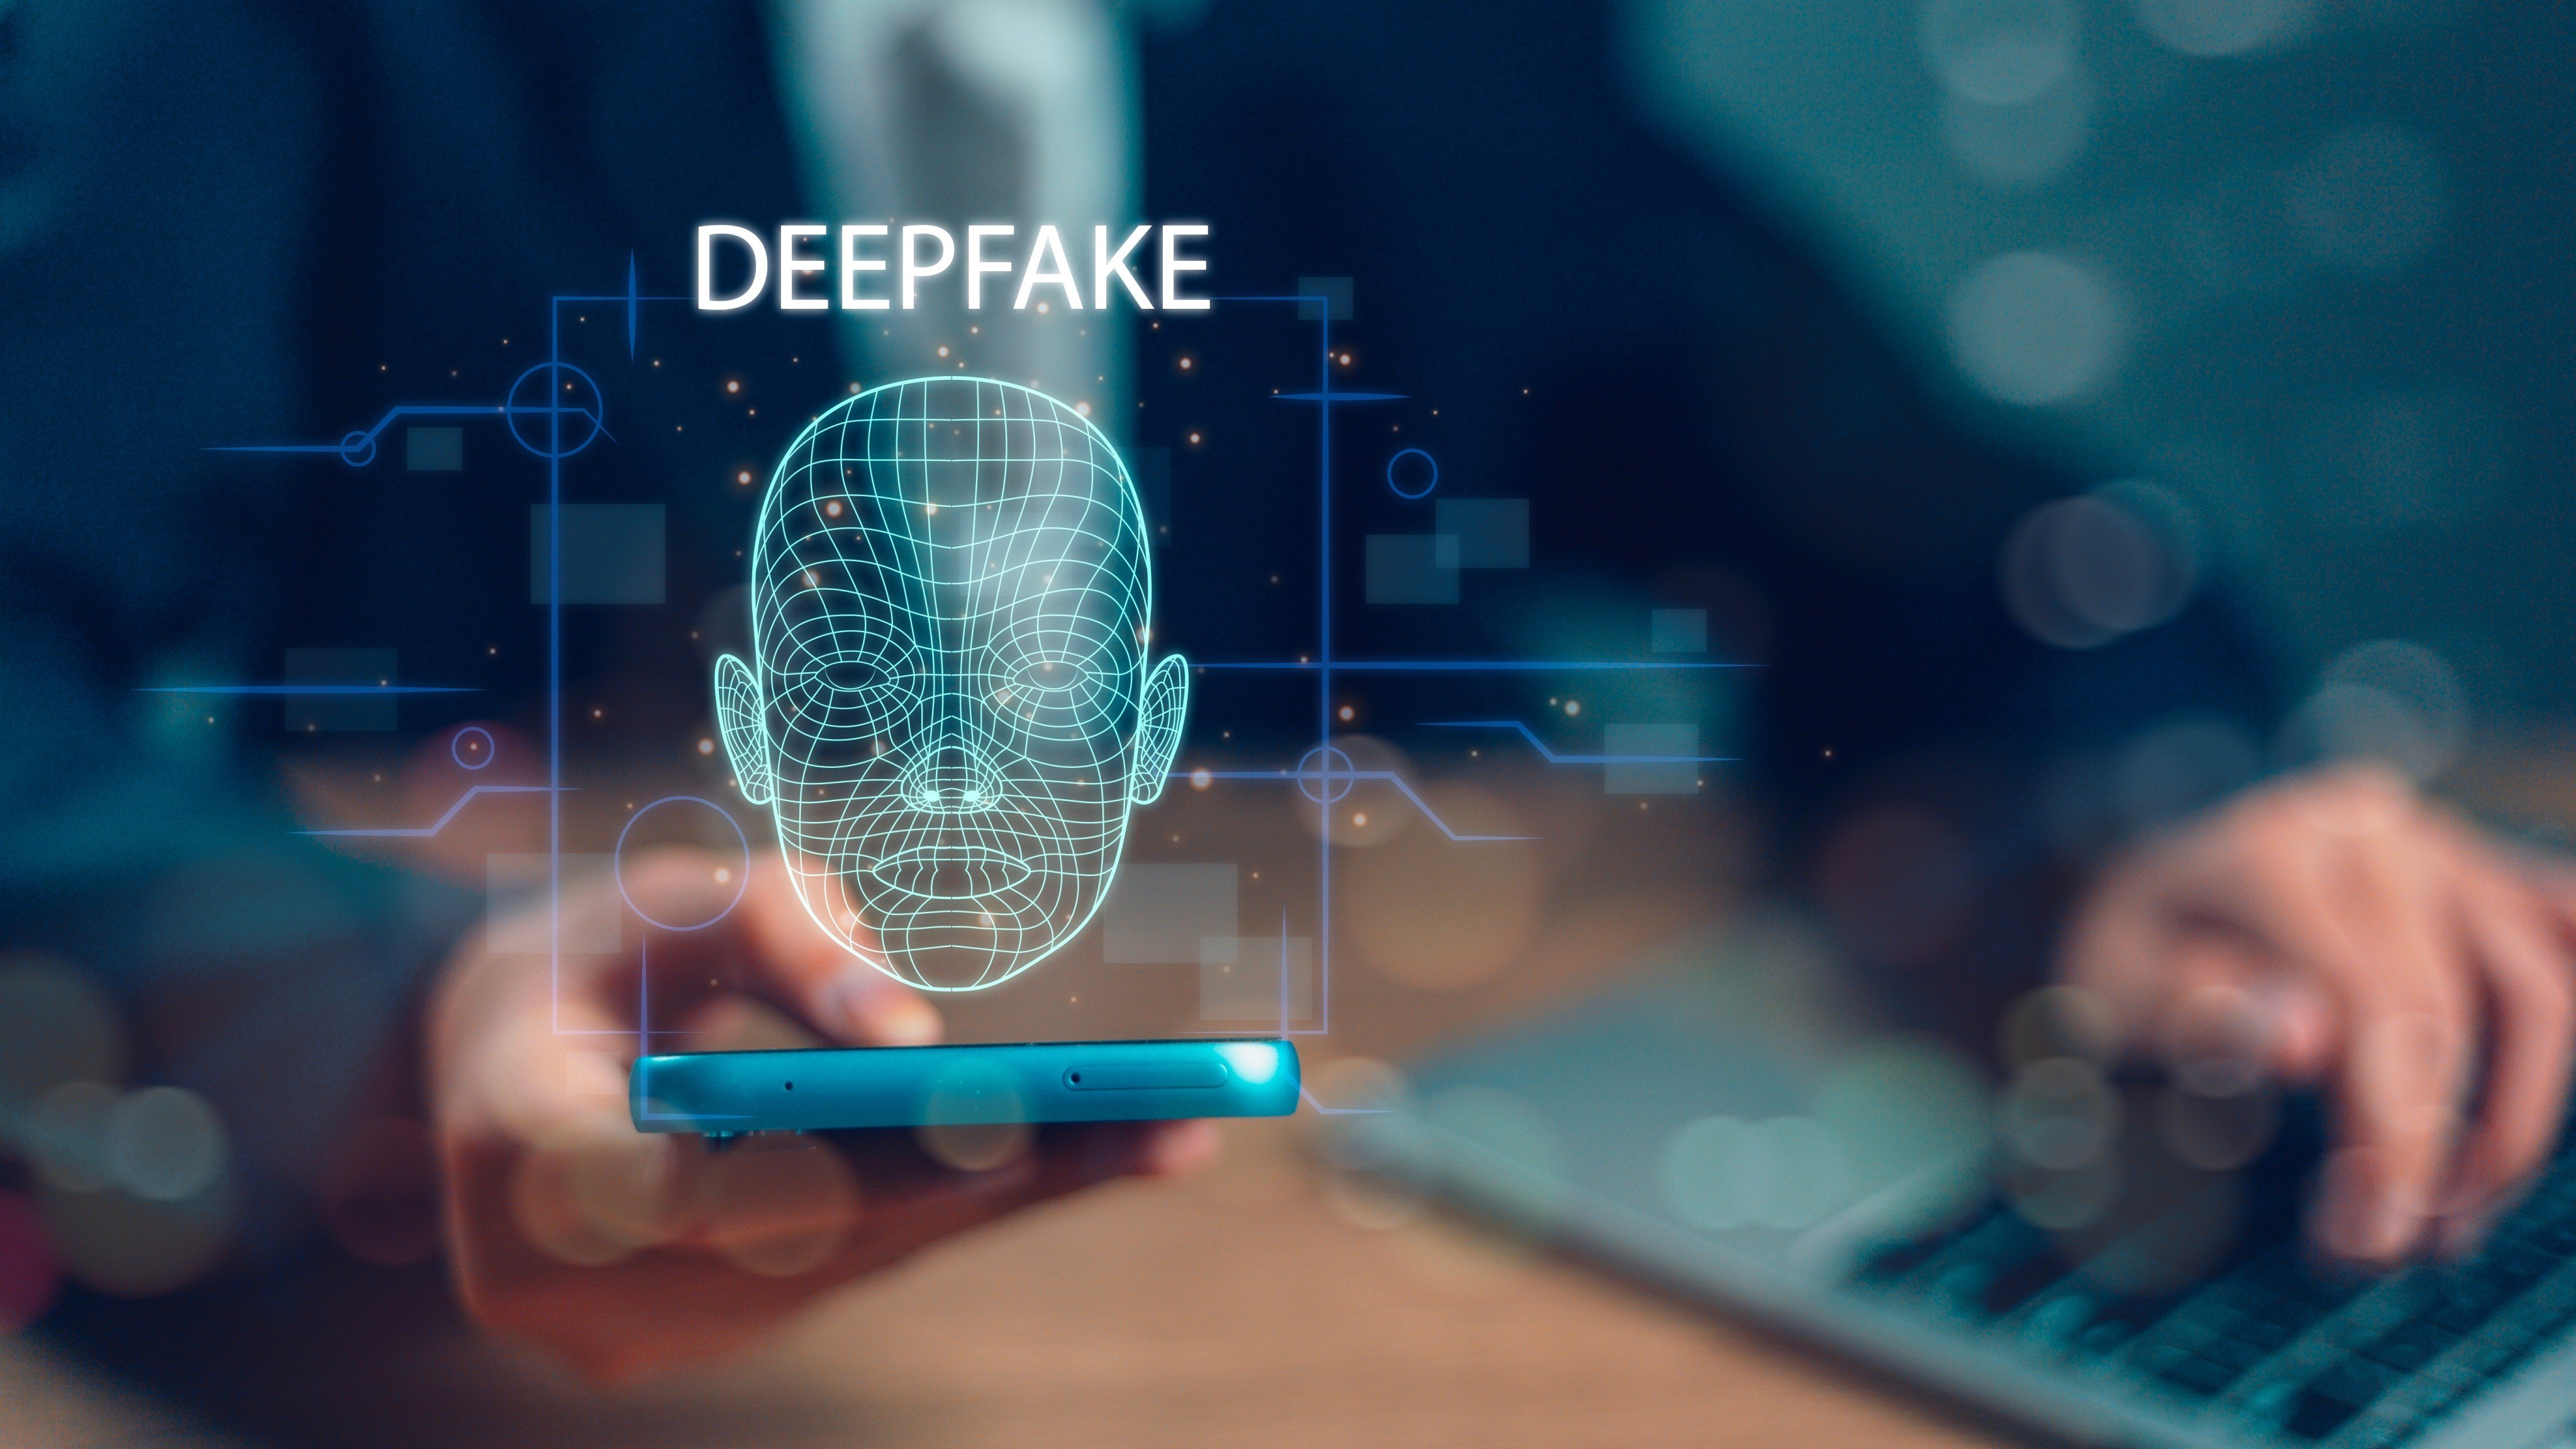 A UK-based multinational firm has fallen victim to a deepfake scam. Photo: Shutterstock